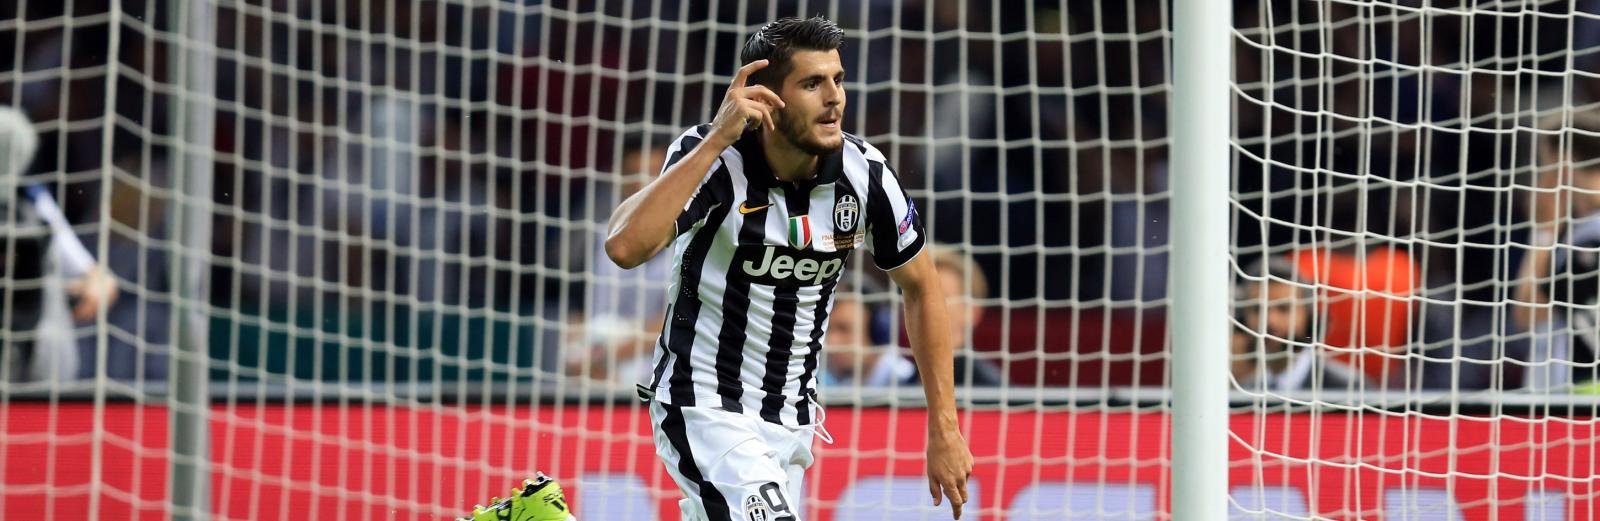 Arsenal to offer Juventus ace £155,000-a-week in a bid to beat Manchester United and Chelsea